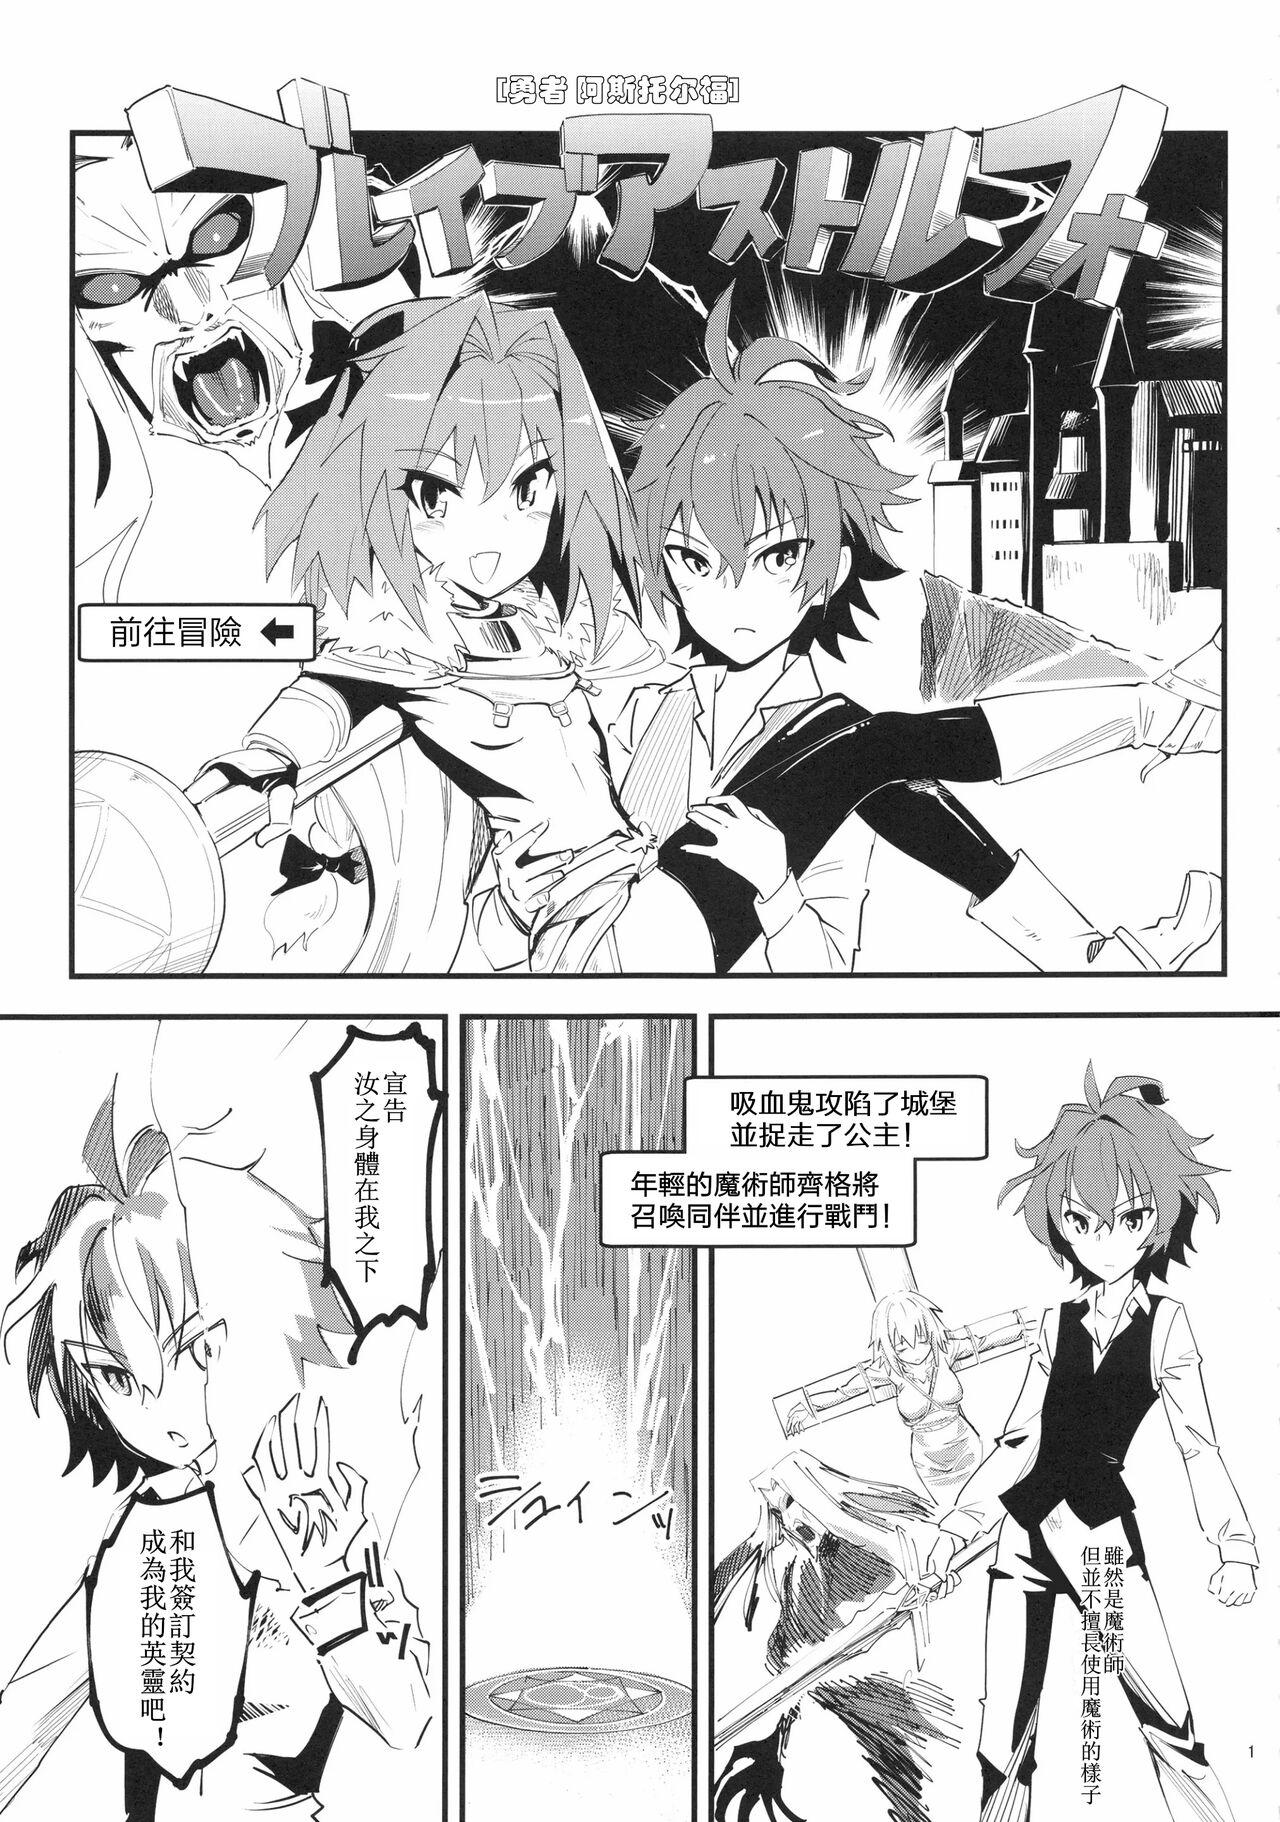 Tats CLASS CHANGE!! Brave Astolfo - Fate apocrypha Gay Amateur - Page 3